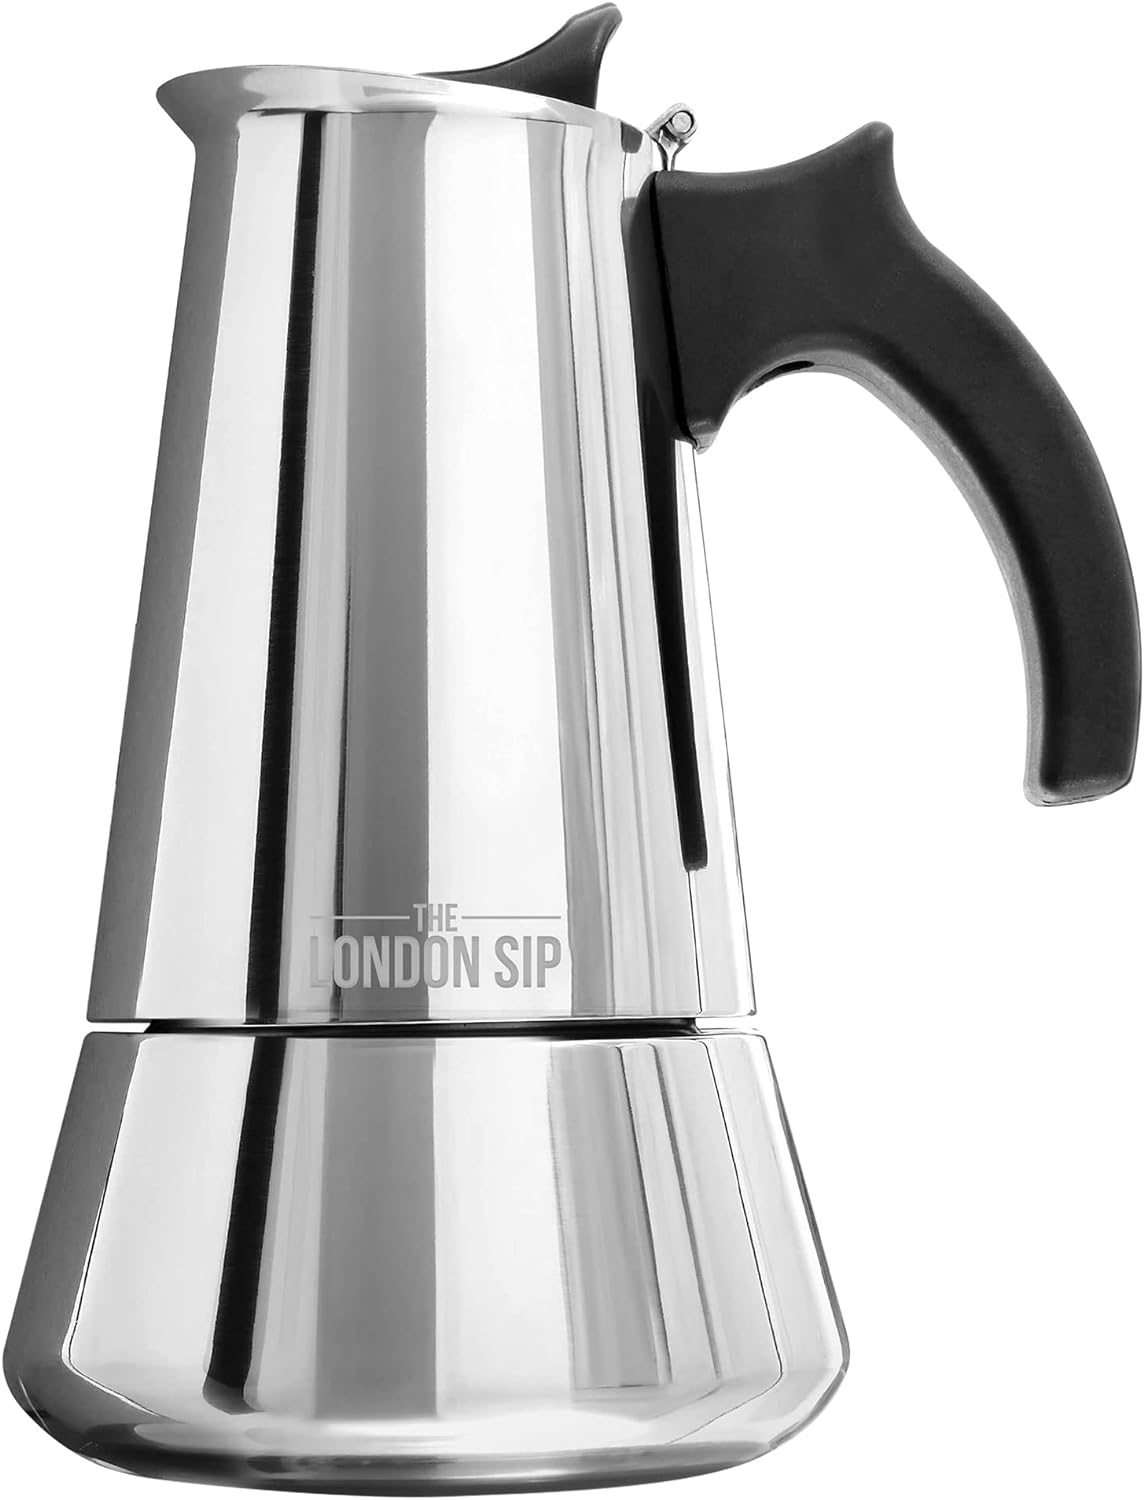 High Quality Stainless Steel Espresso Maker by the London SIP - Induction Suitable for Real Italian Espresso Enjoyment in your Home - Easy to Prepare and Clean - (Silver, 3 Cups 150ml)